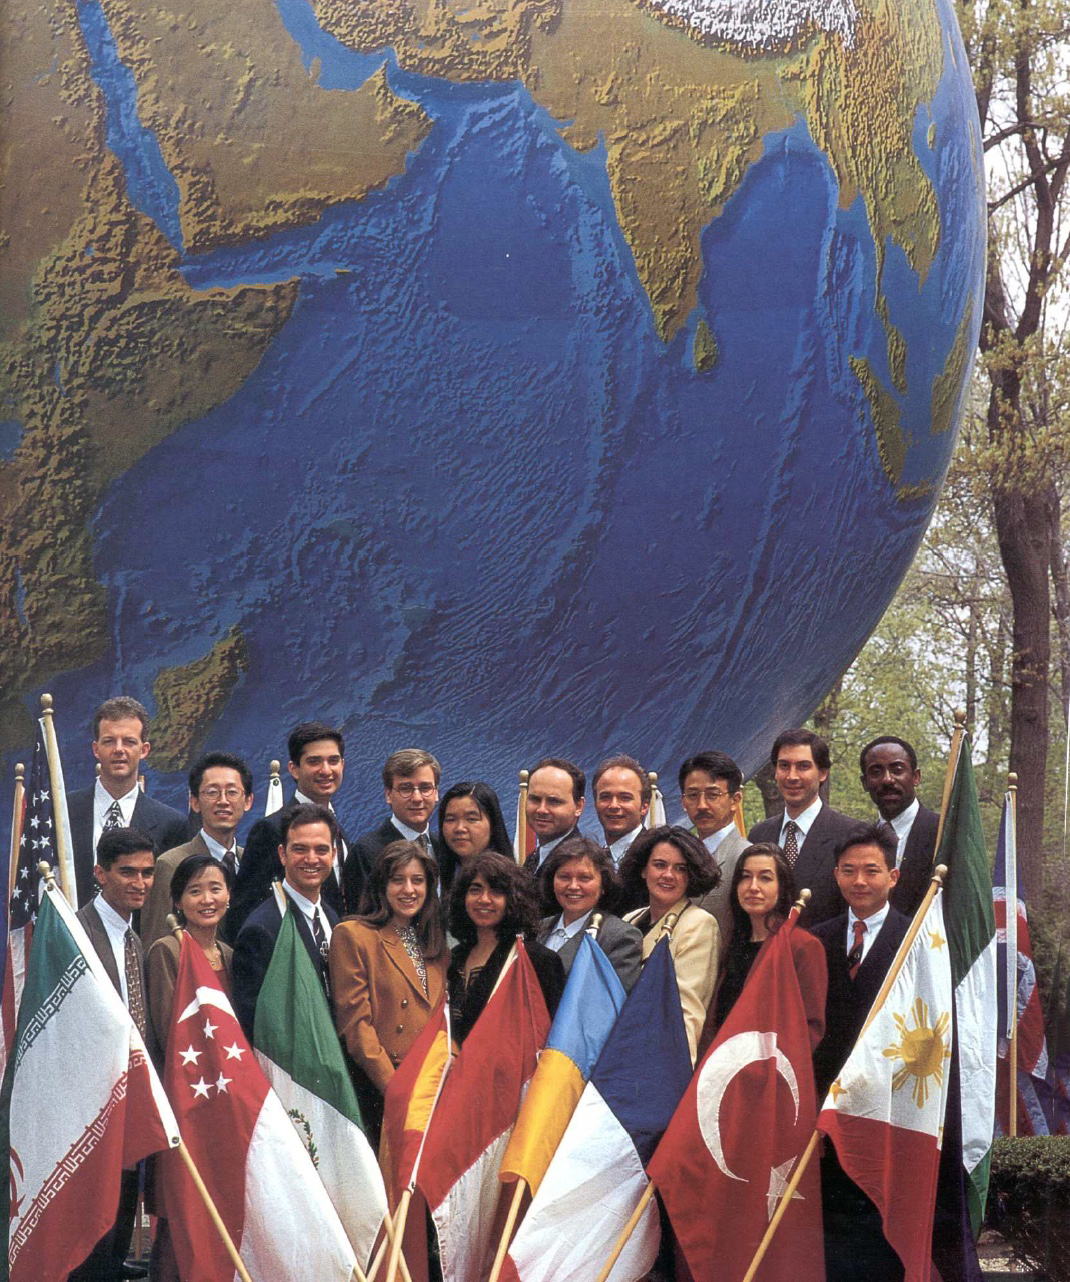 Babson student countries represented